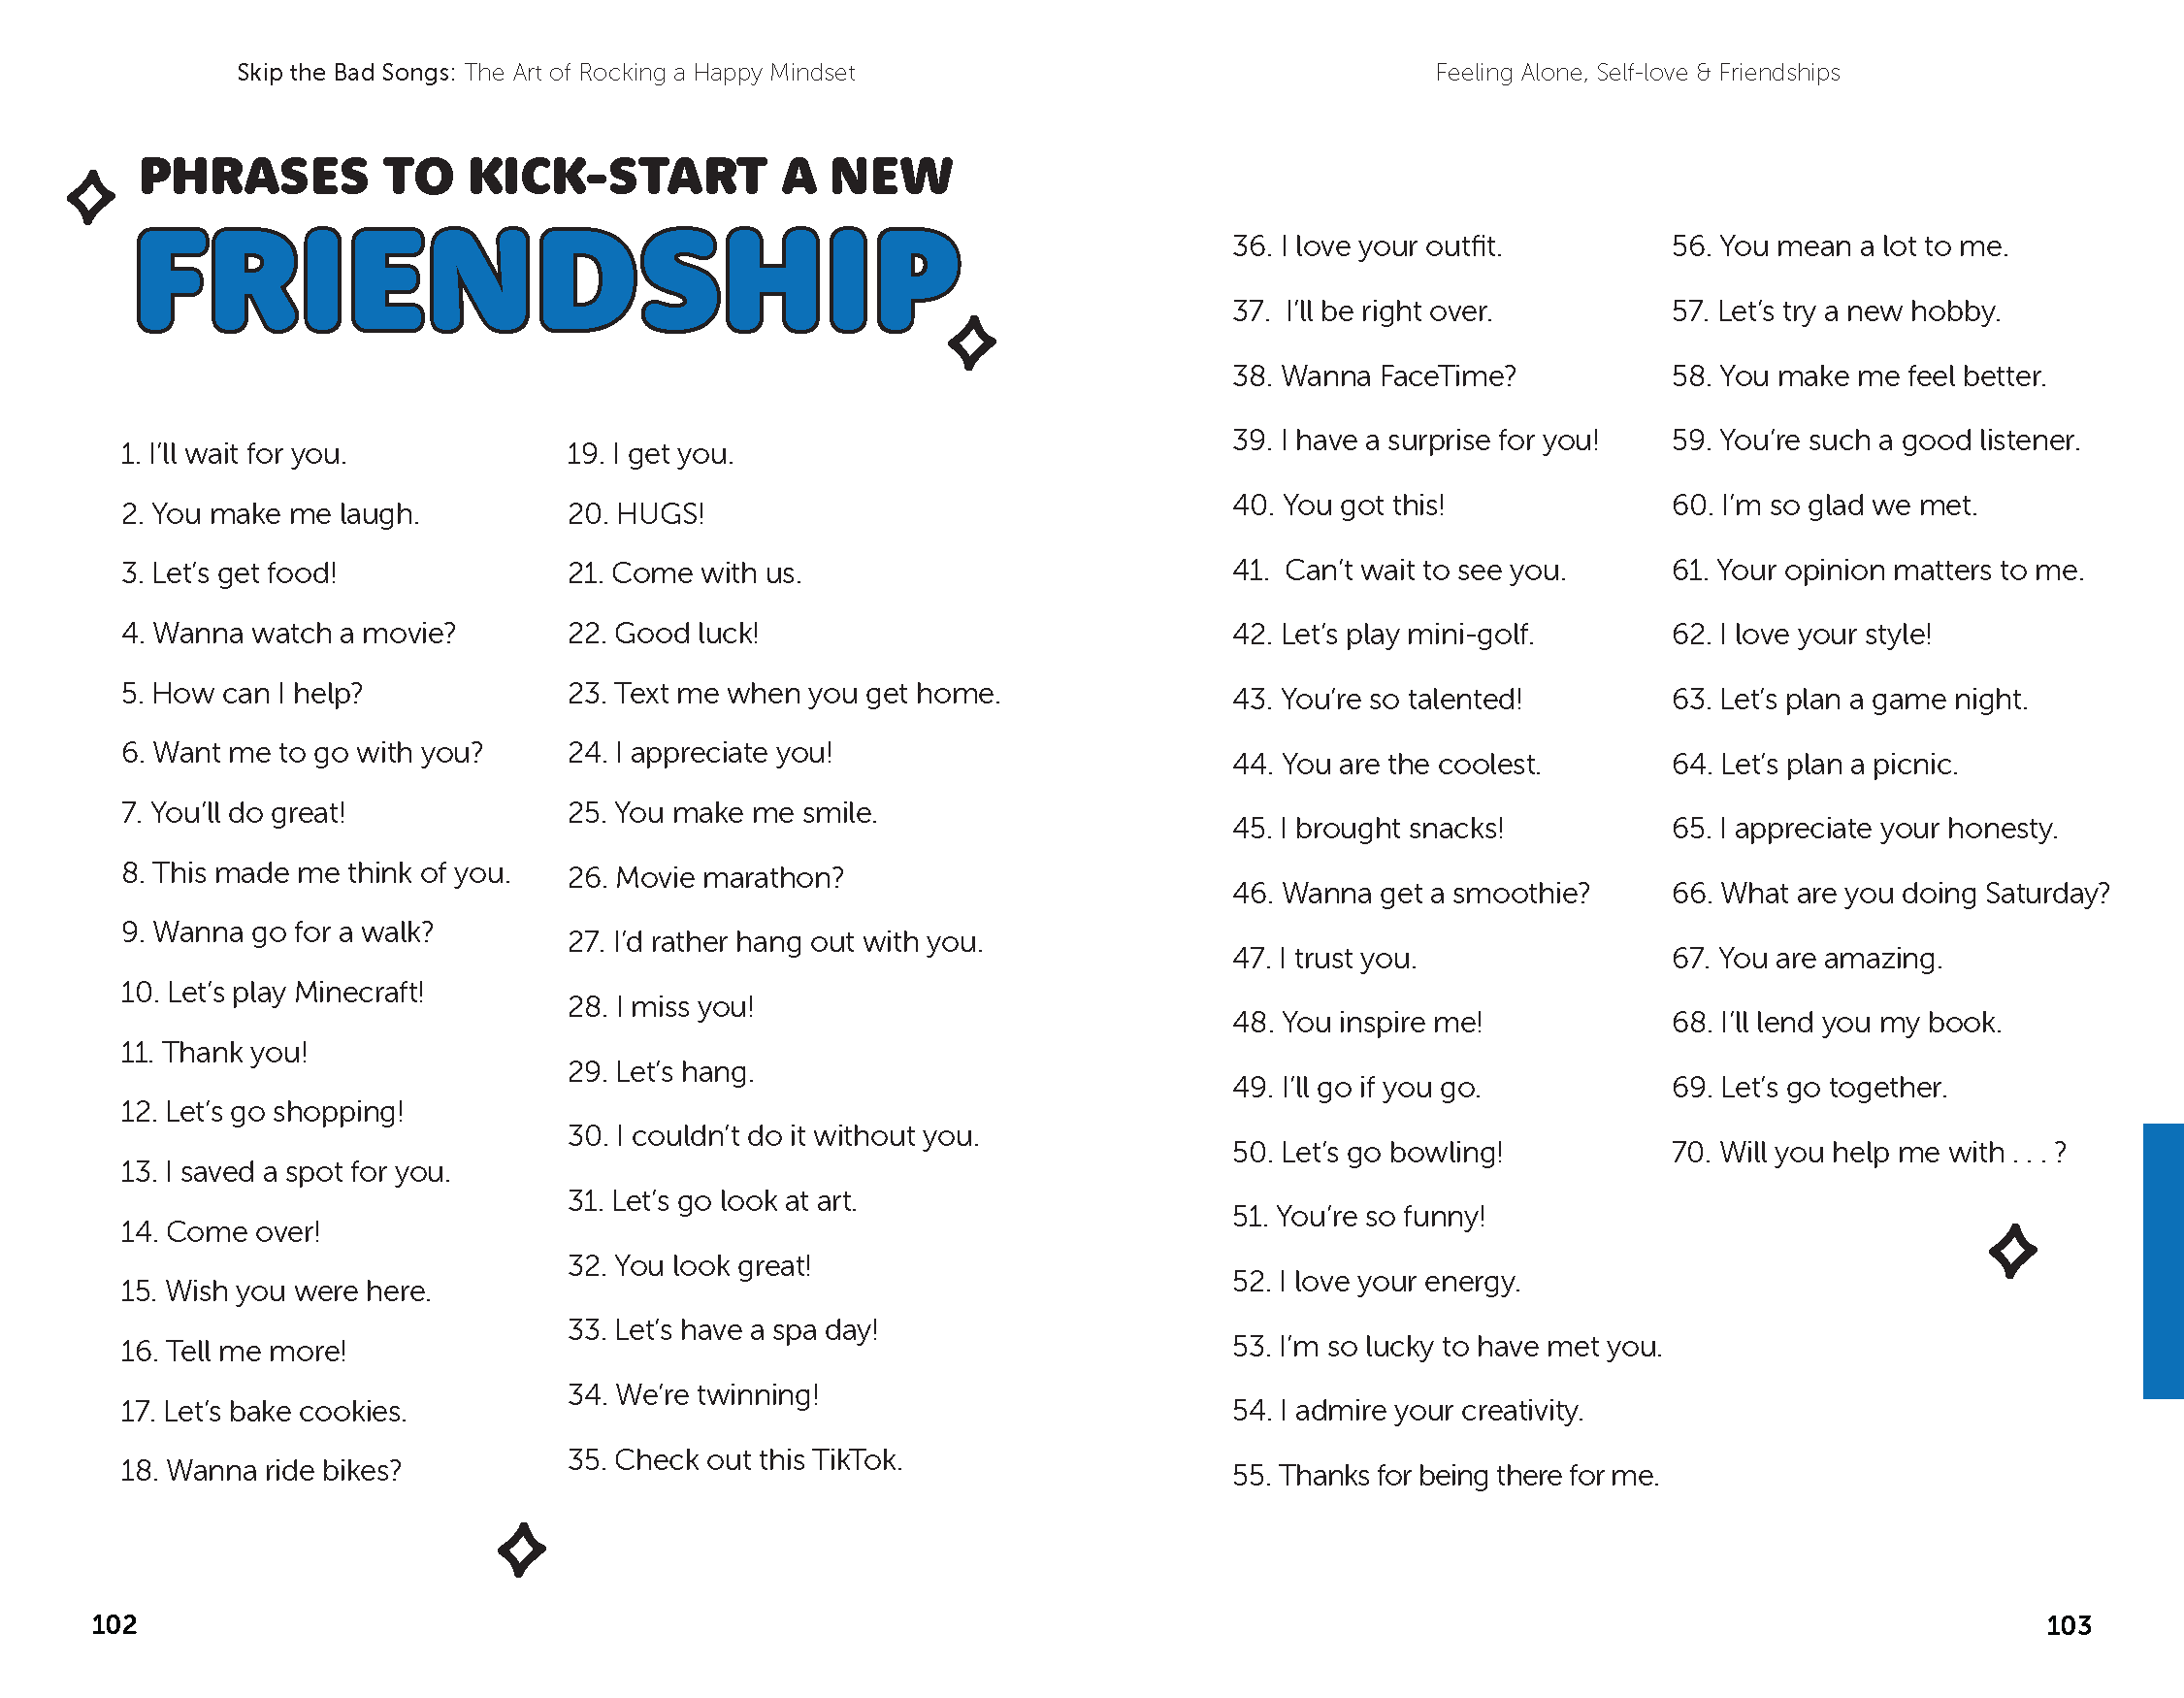 Phrases to make new friends page in the book, Skip the Bad Songs, a self help book for tweens